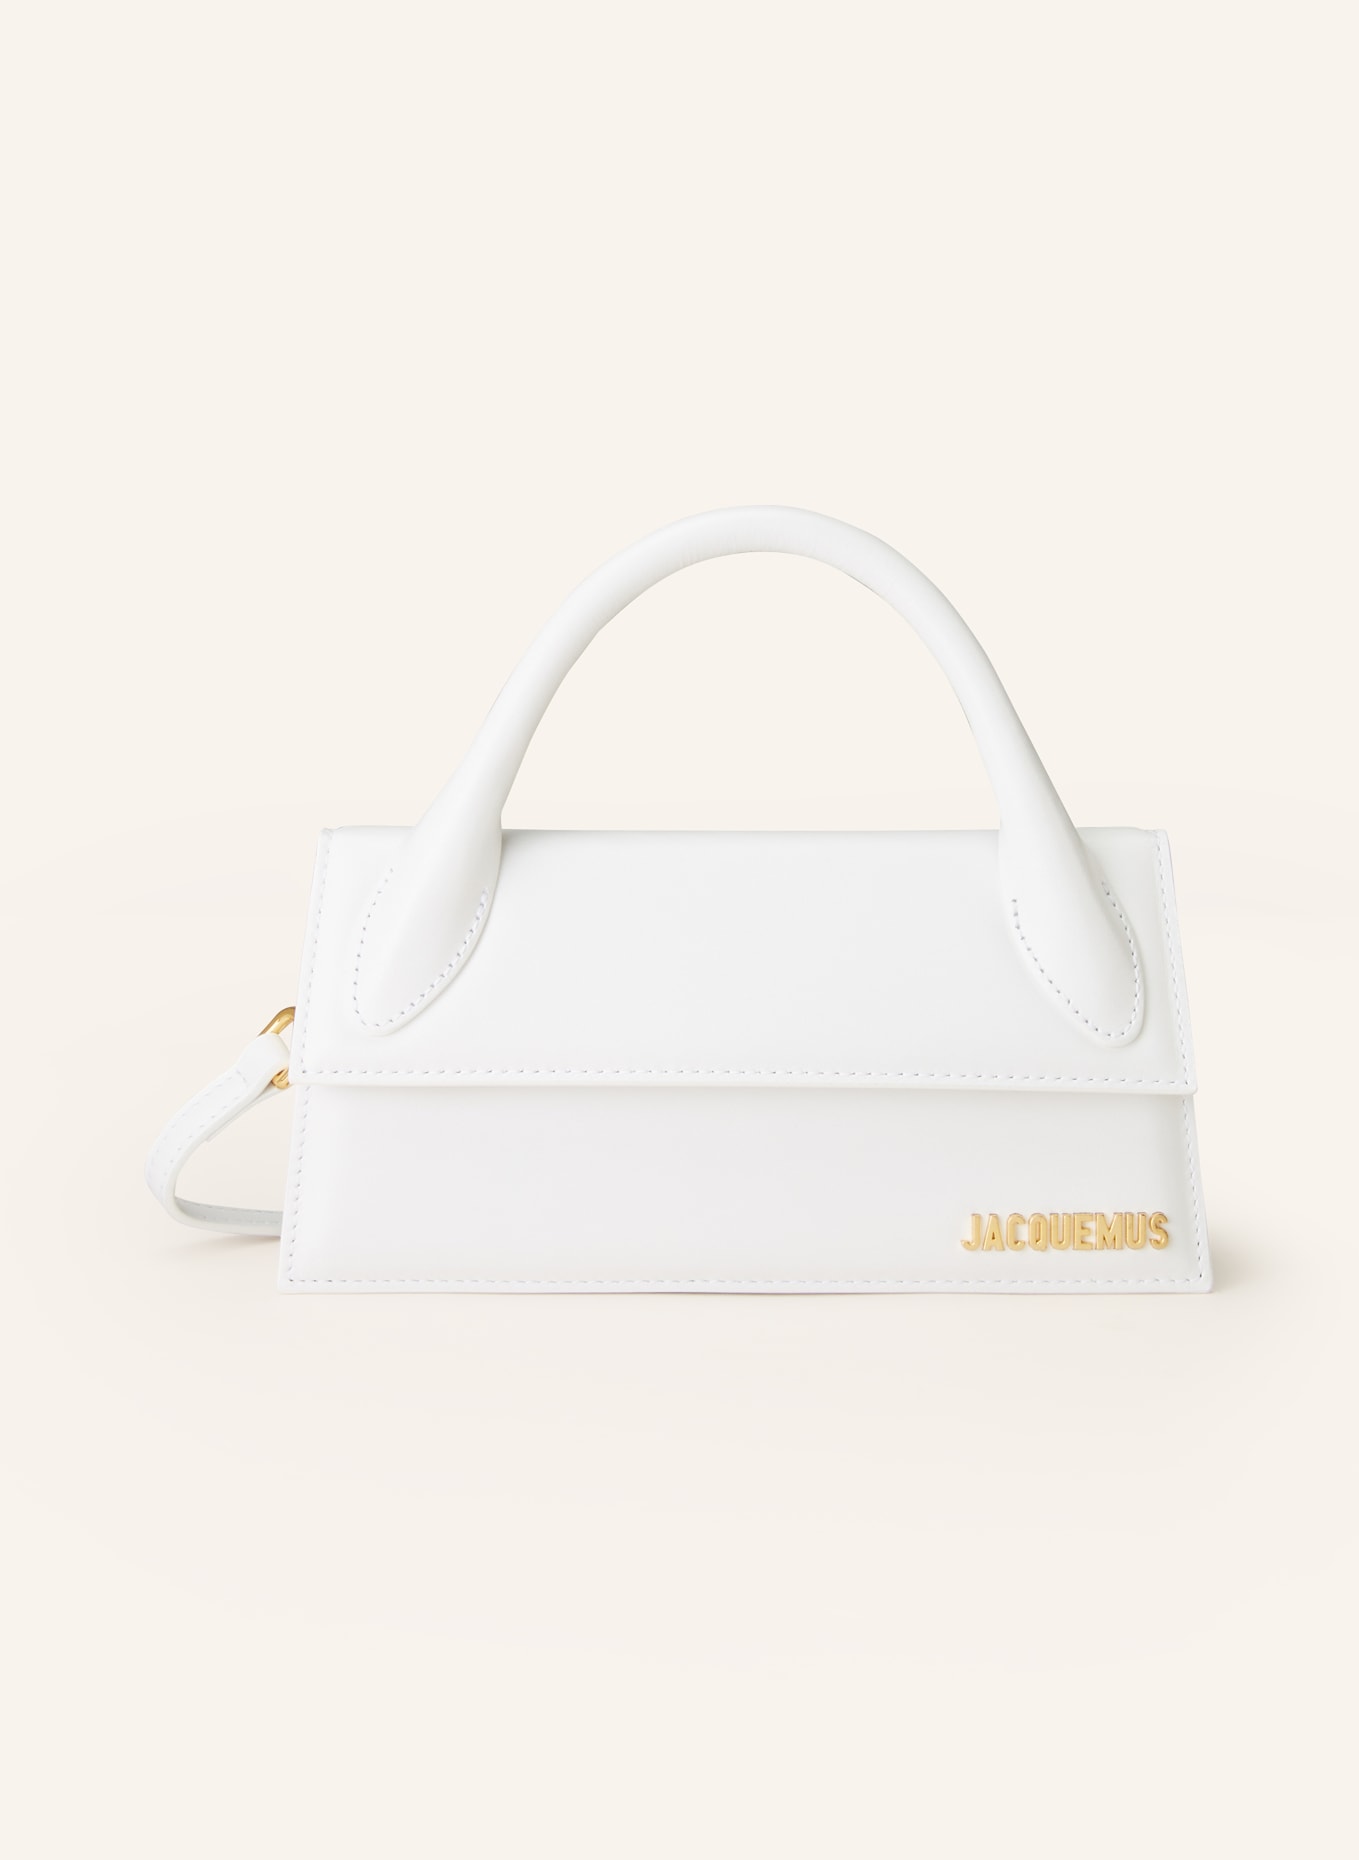 JACQUEMUS Handtasche LE CHIQUITO LONG , Farbe: WEISS (Bild 1)